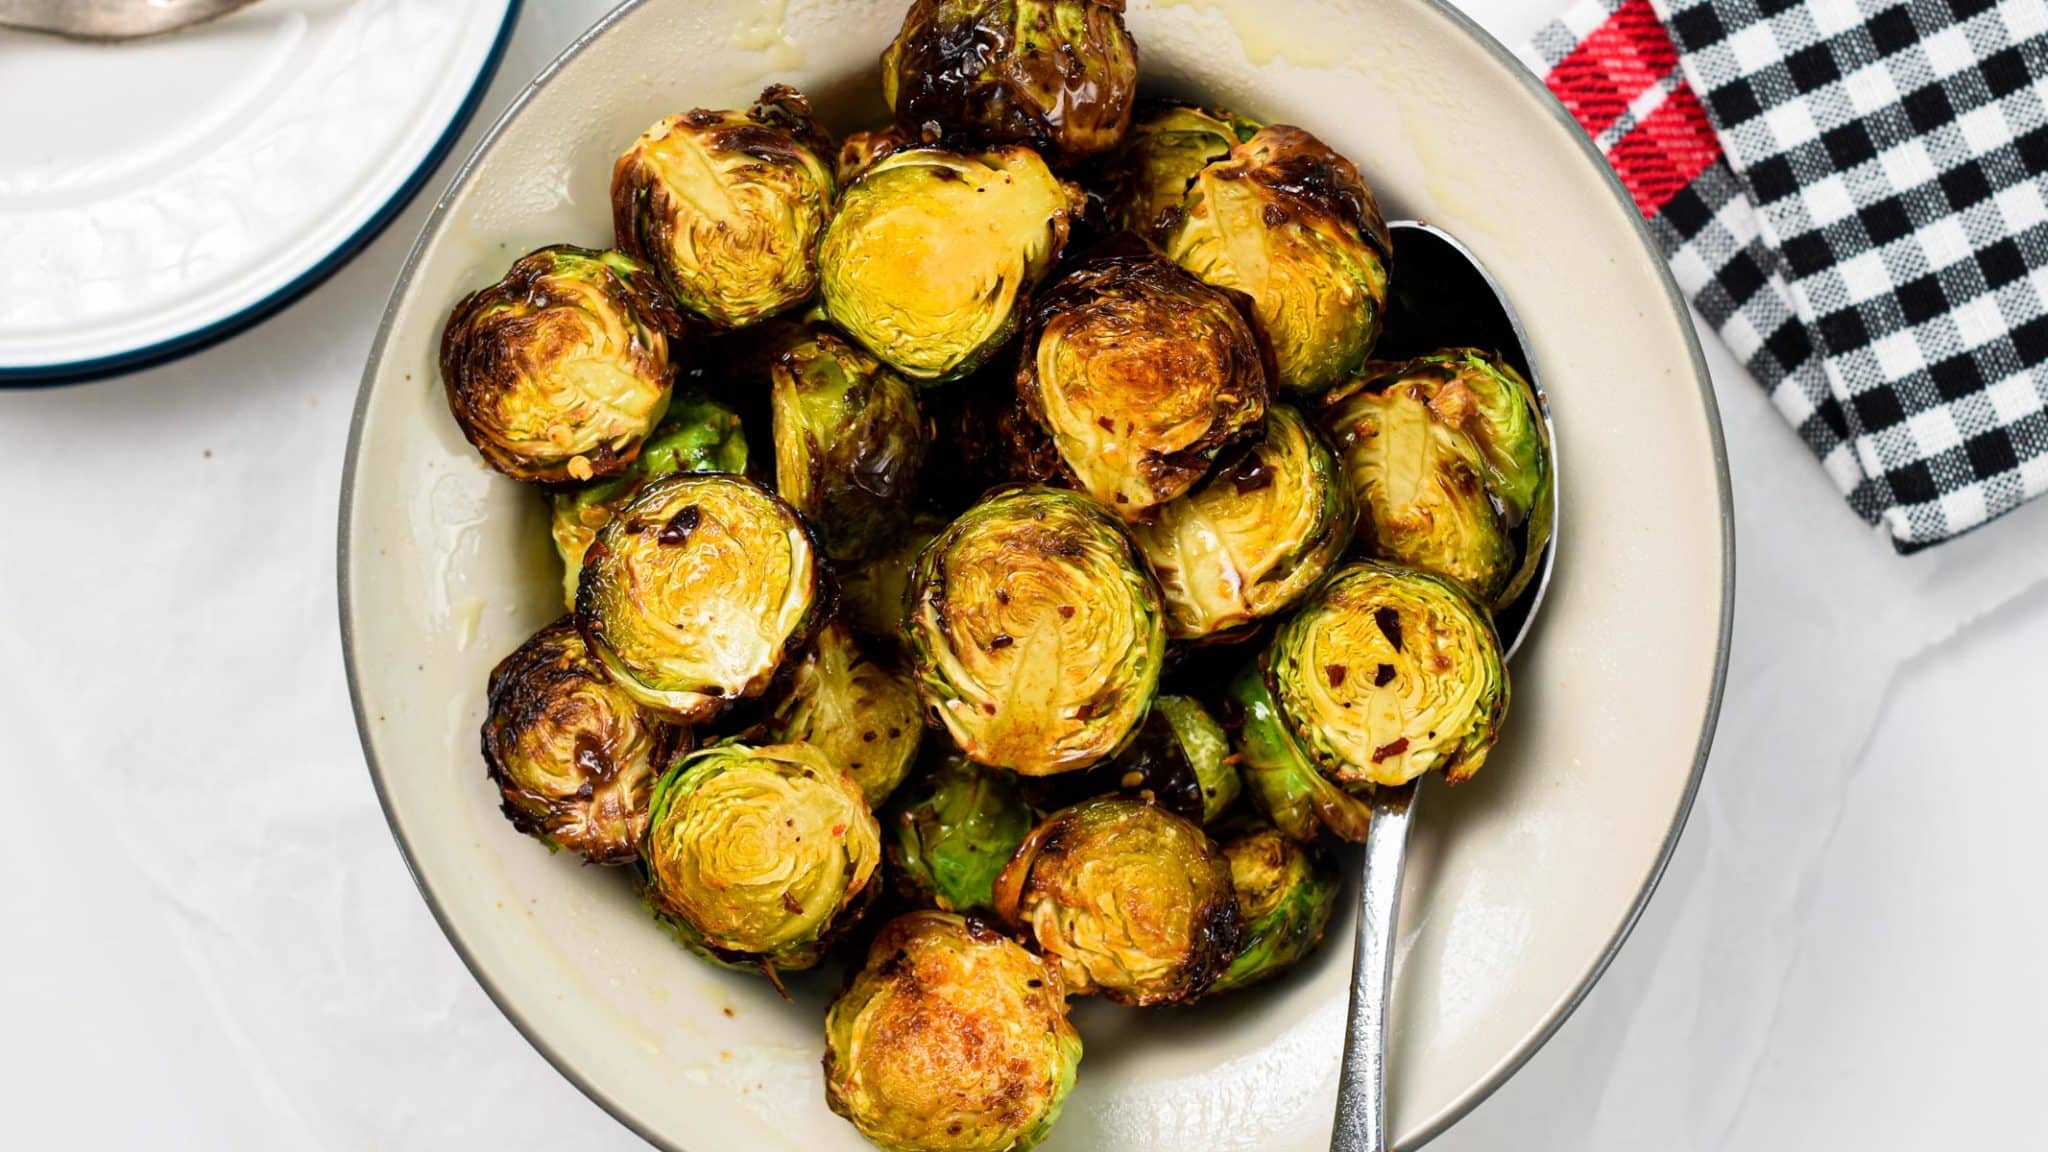 Air Fryer Brussel Sprouts